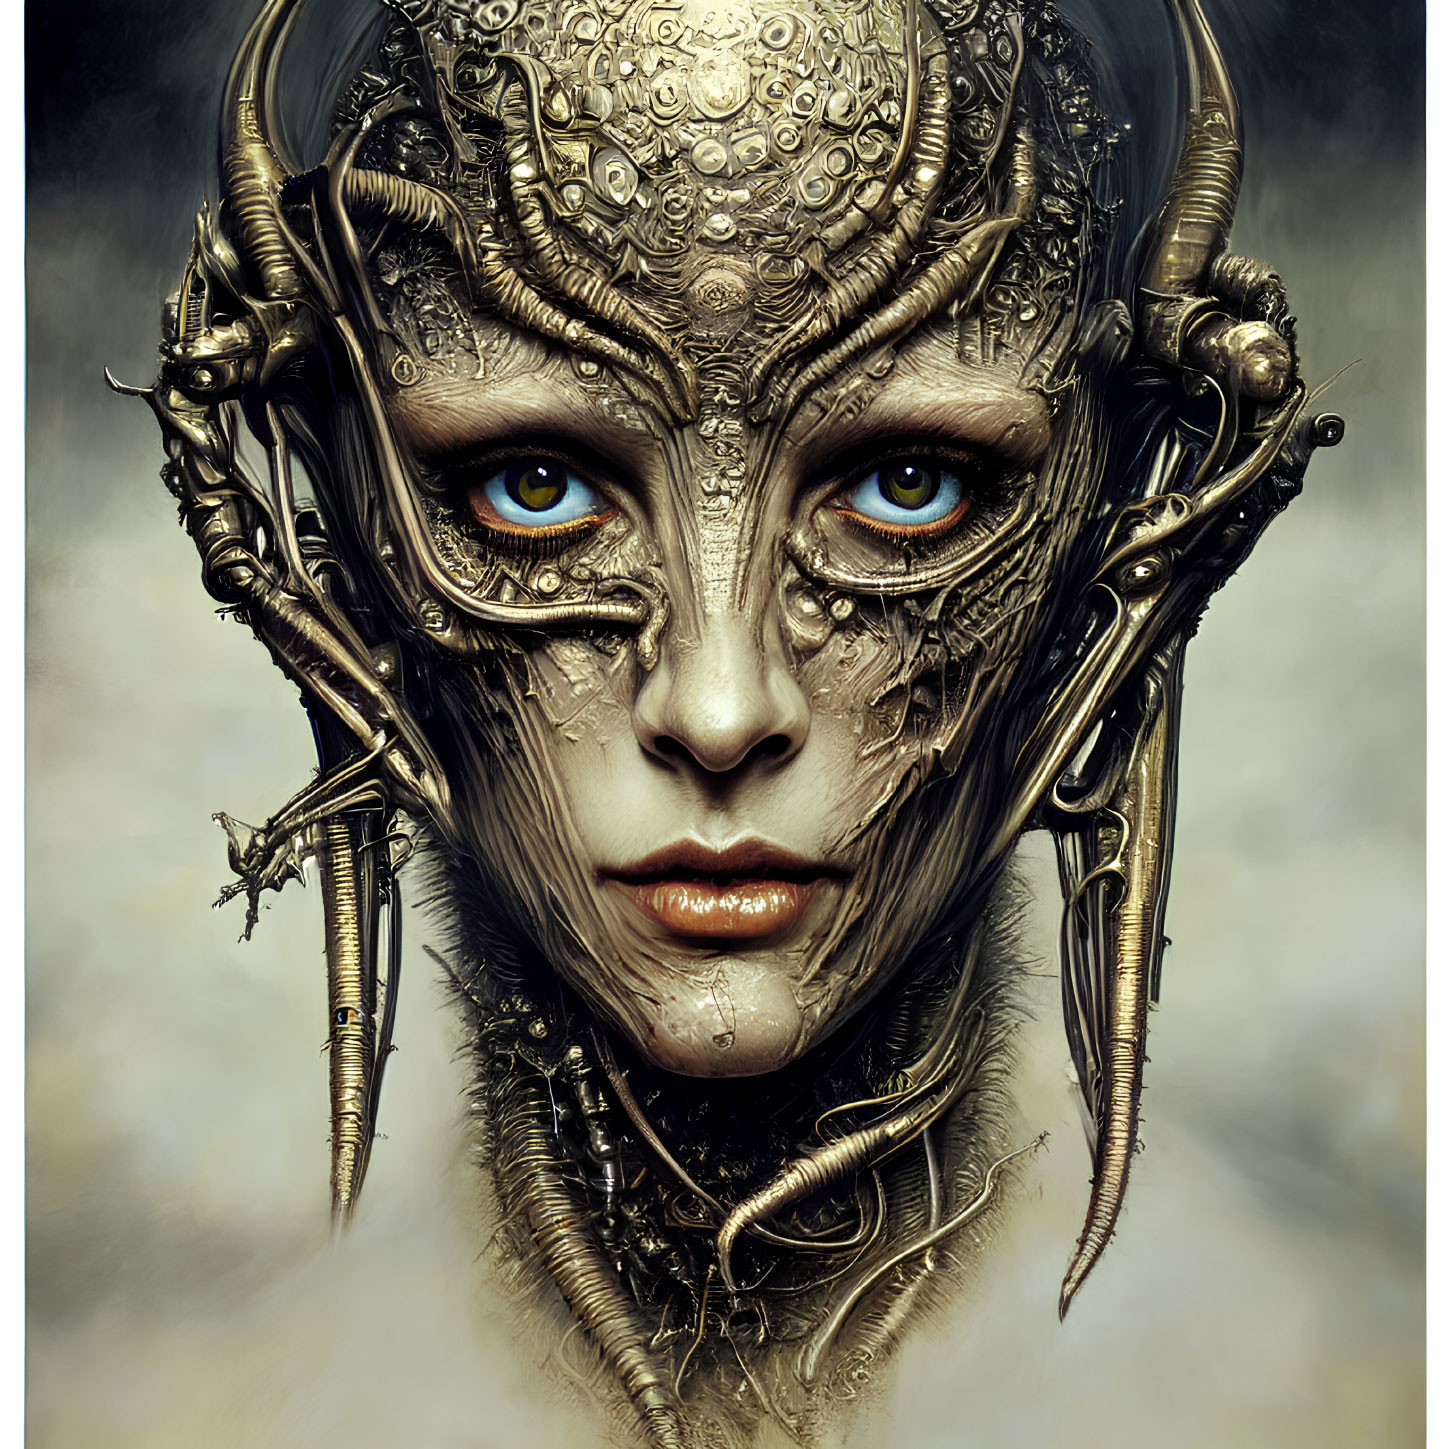 Detailed Digital Artwork: Cyborg Head with Human-like Features